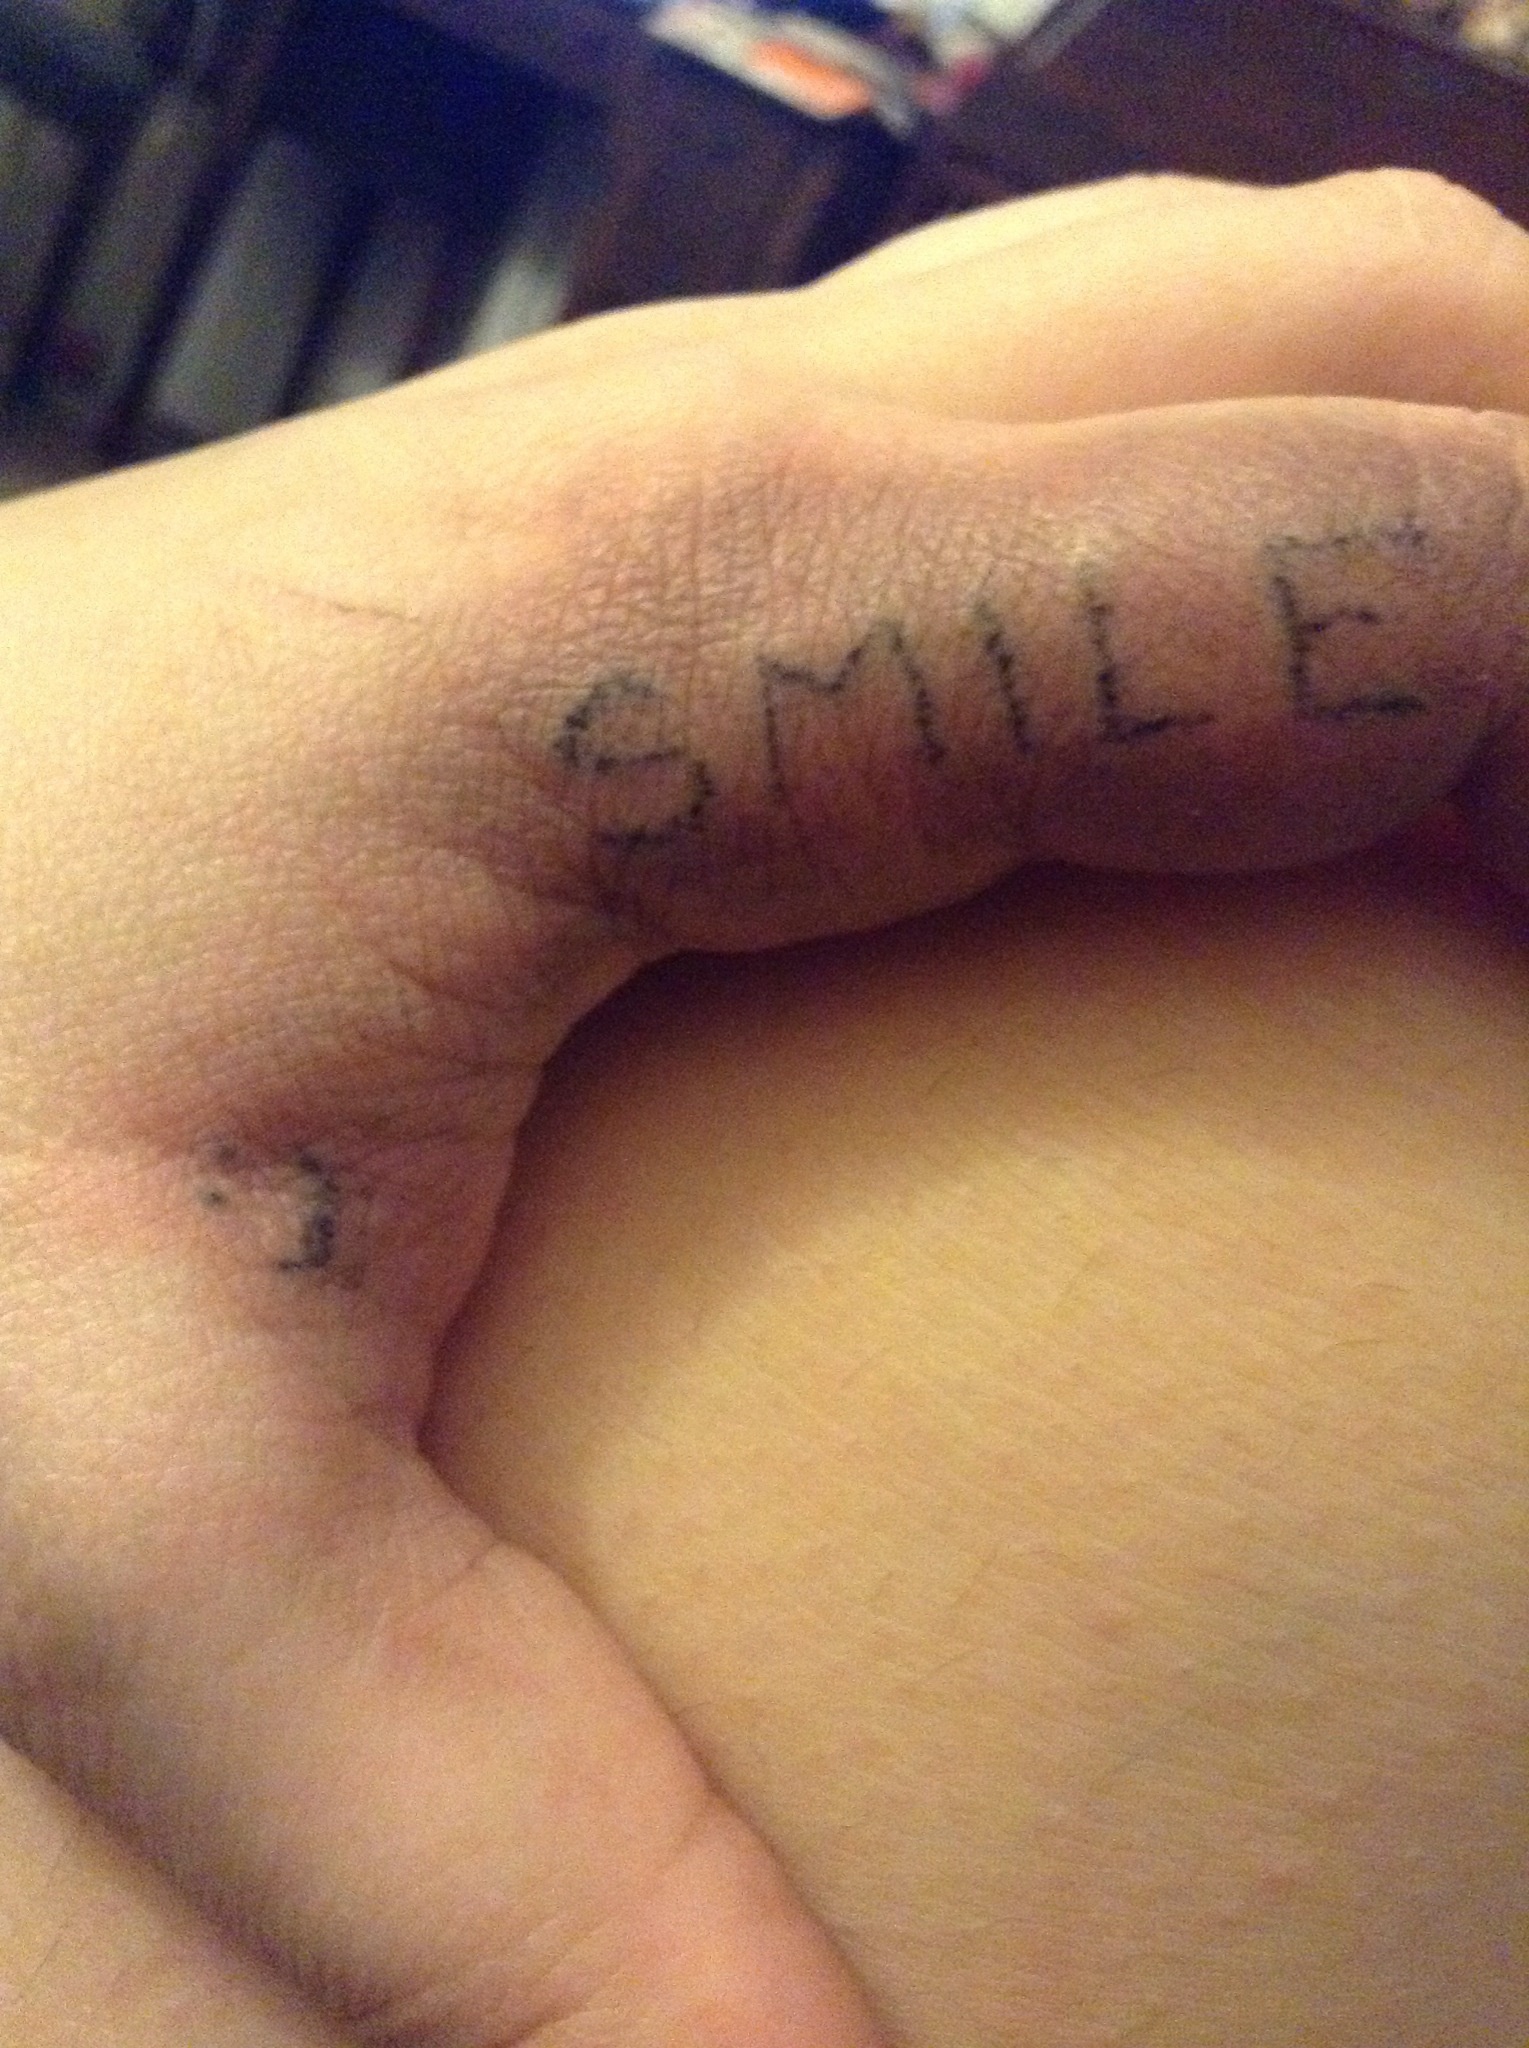 drunkenly gave myself a really shitty stick n poke with pen ink PLS HELP i  have no idea what to do w this but i know something isnt right advice  pls 